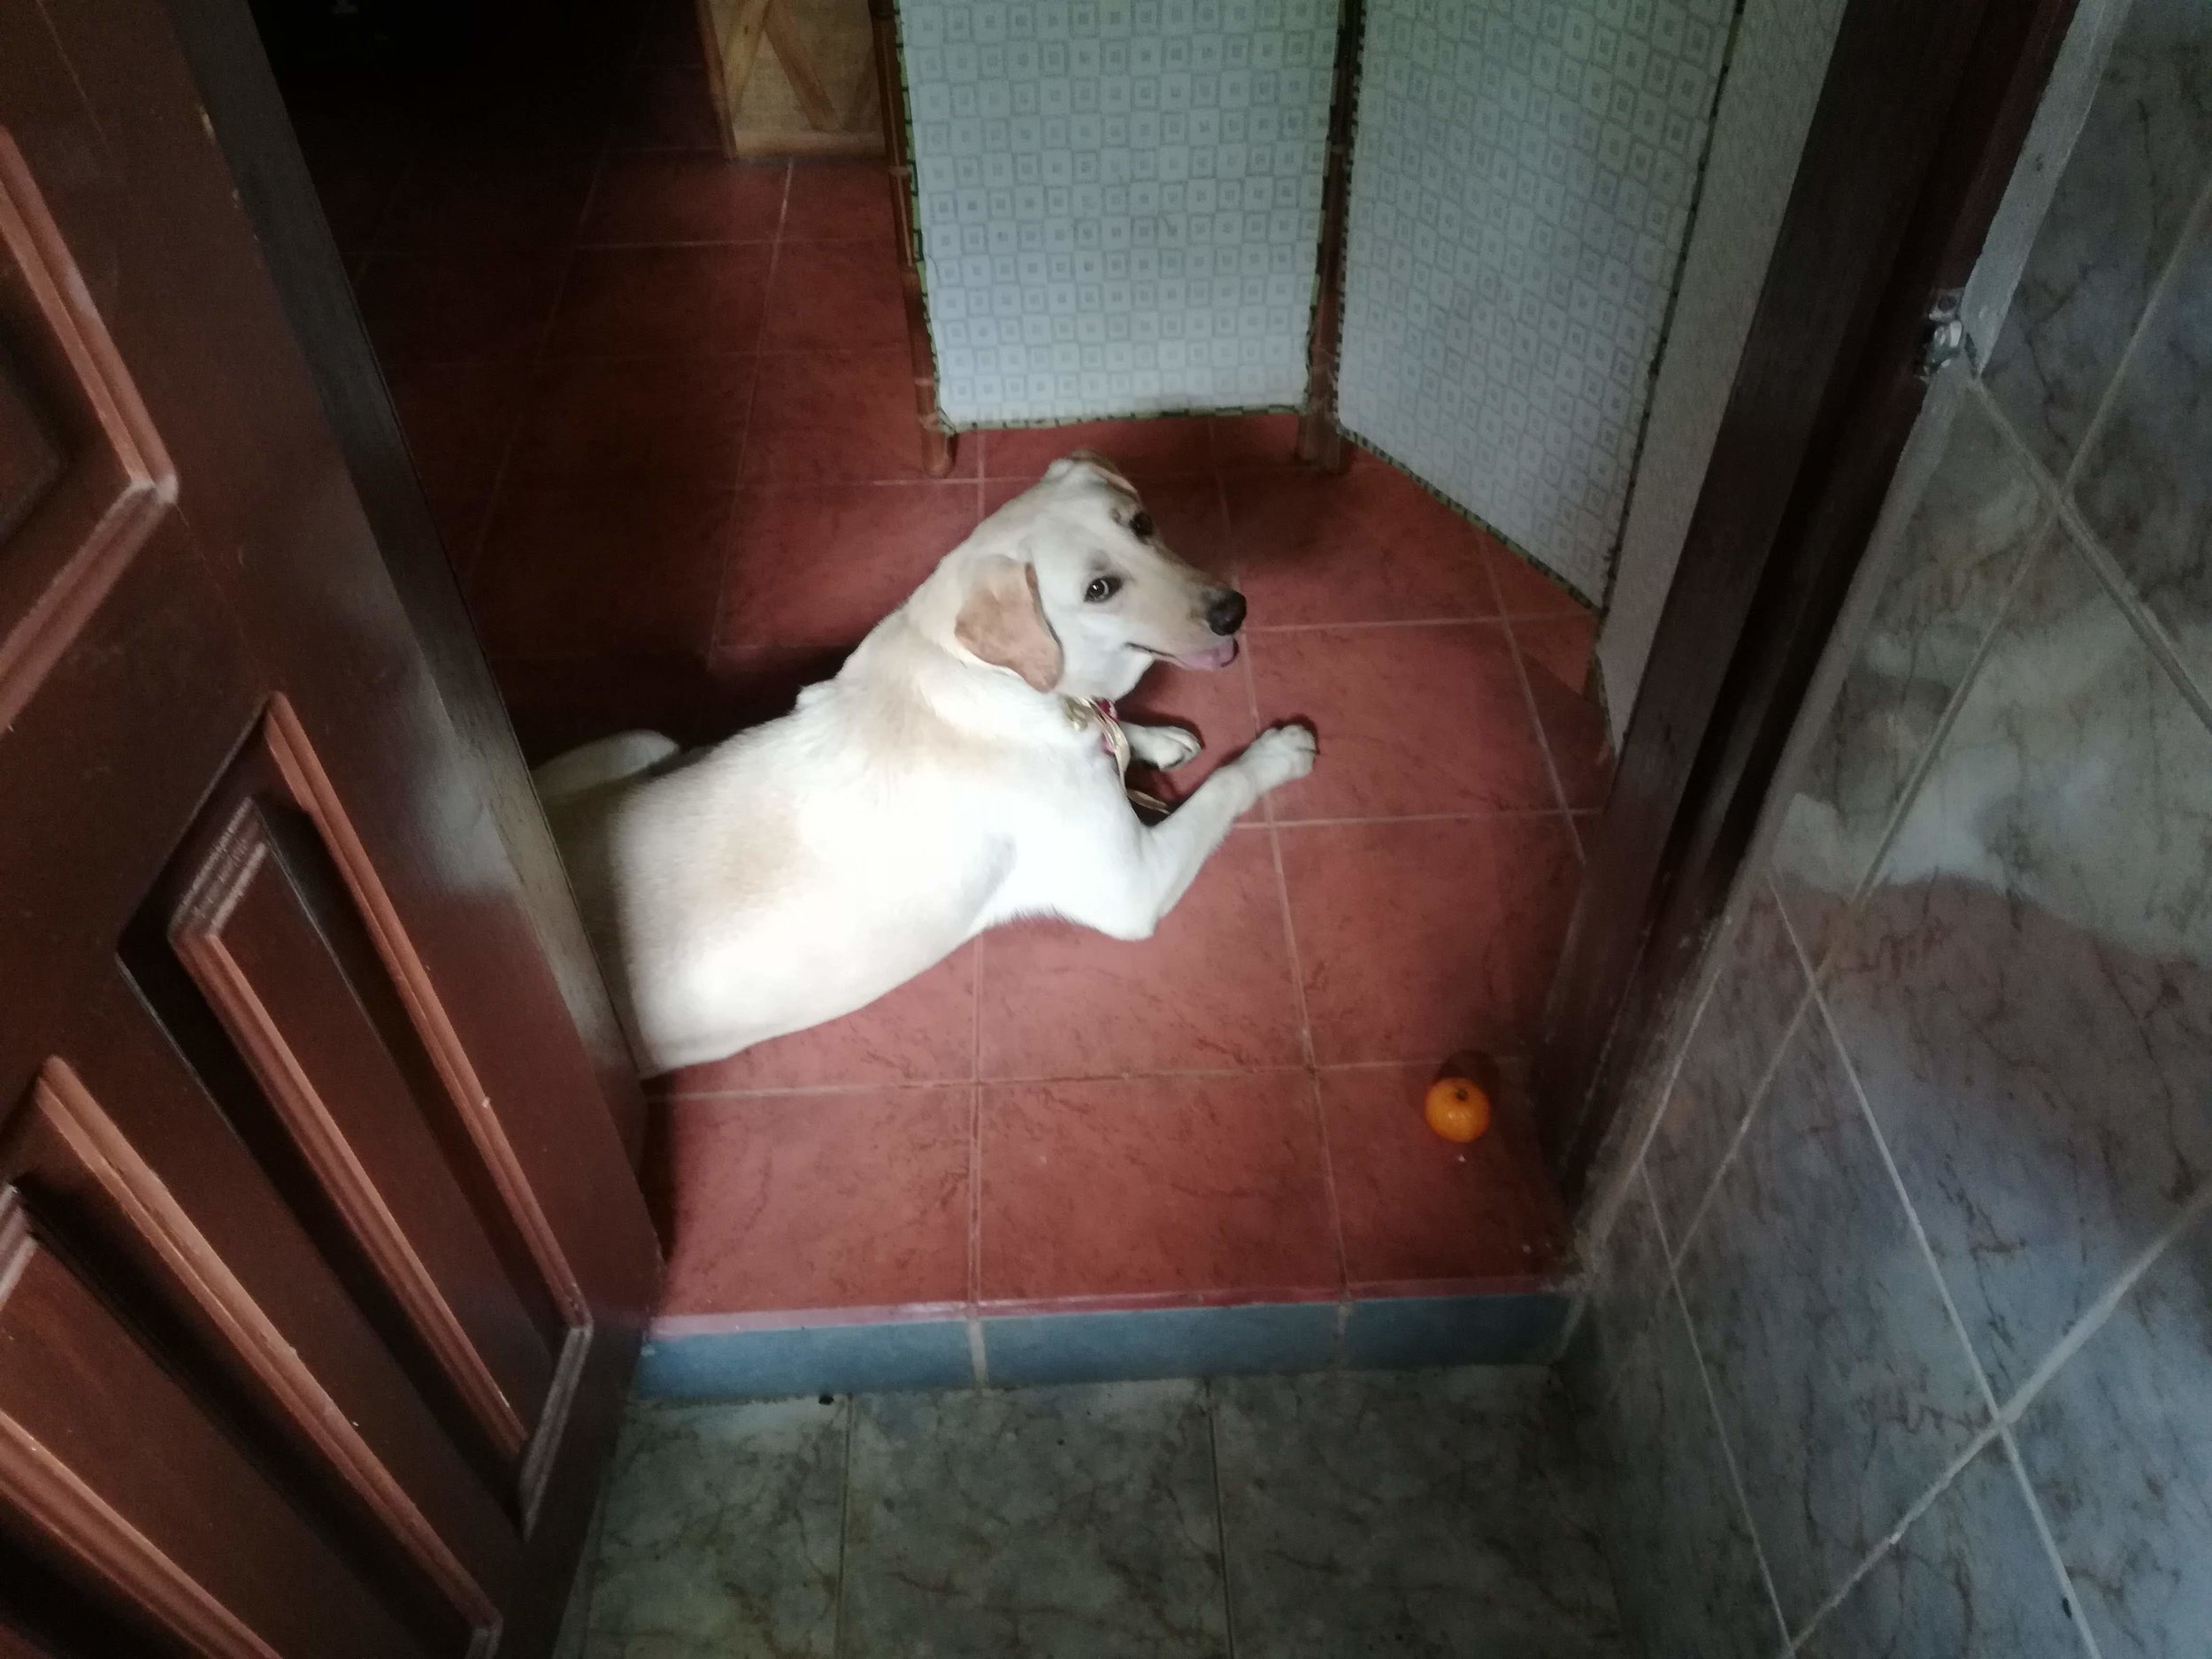  She wants you to throw limes for her to fetch. She’ll jump up and tear one off a tree. Here, I was coming out of the bathroom and she was waiting with her orange. 